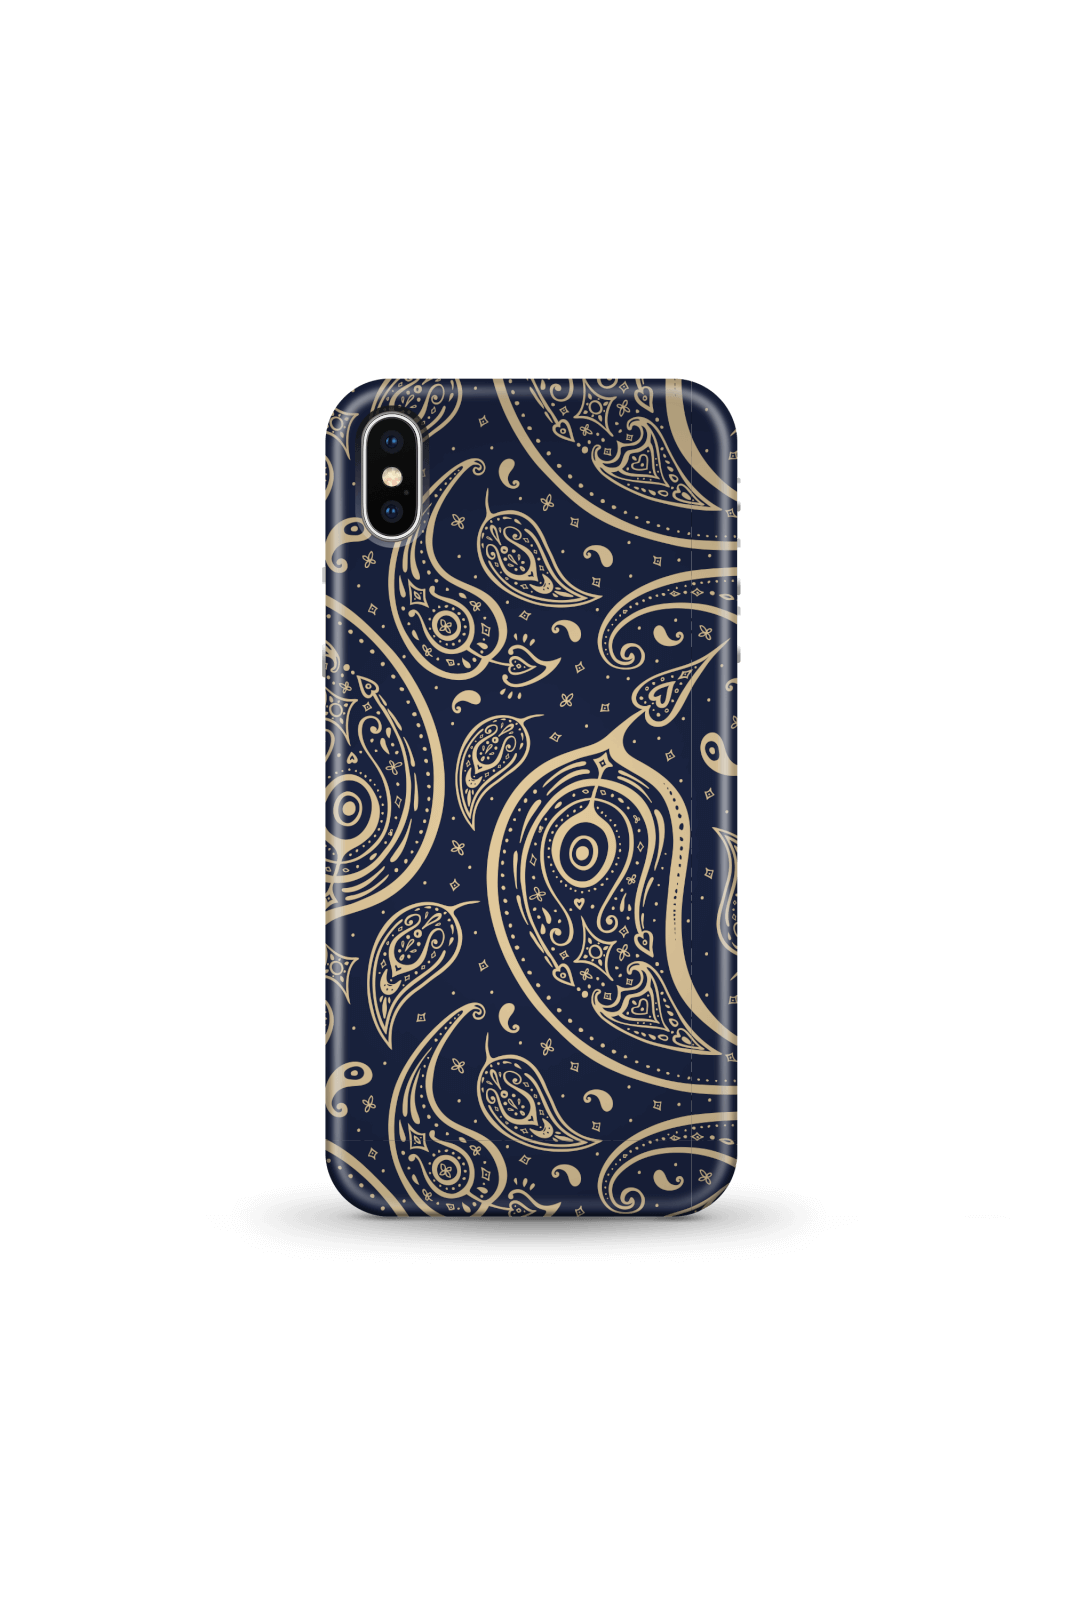 Blue & Gold Paisley Phone Case for iPhone and Android - iPhone 5/5s - Snap Case - Matte